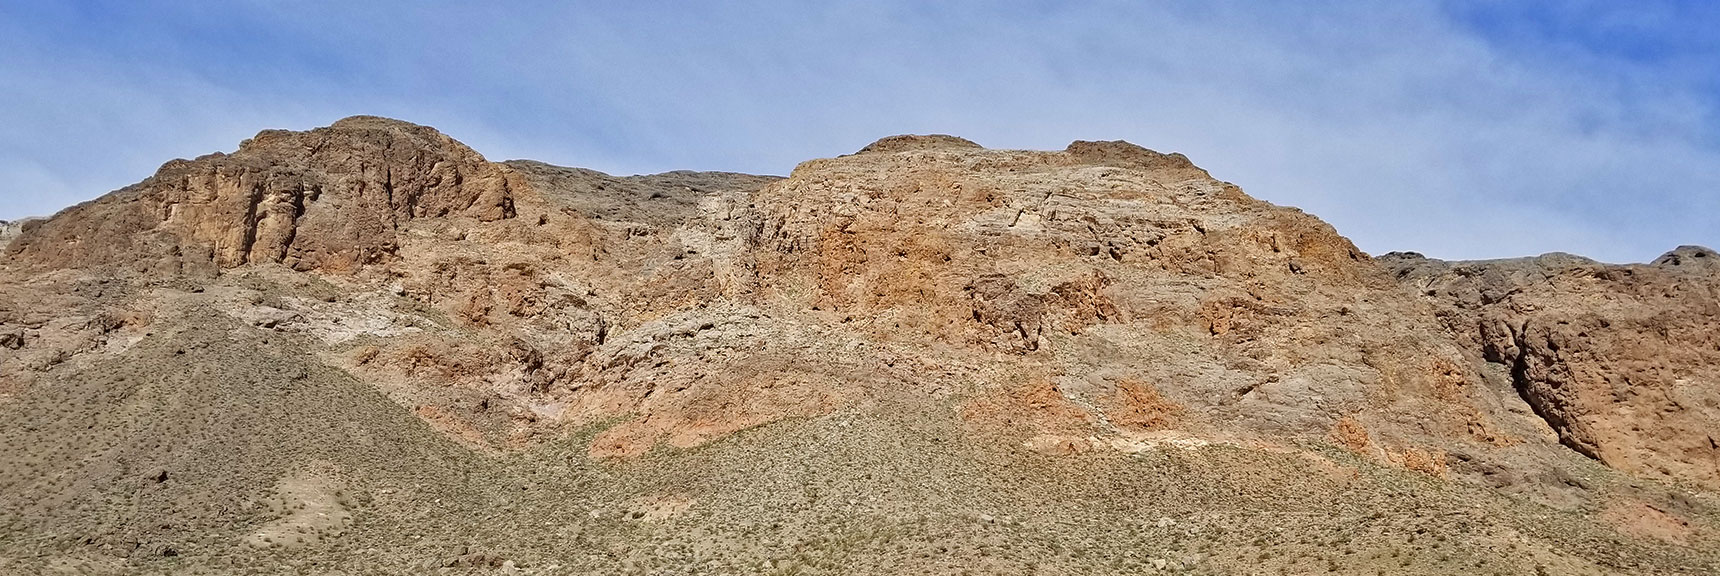 Mideastern View of Muddy Mountains from Echo Road Intersection On Northshore Road in Lake Mead National Park, Nevada